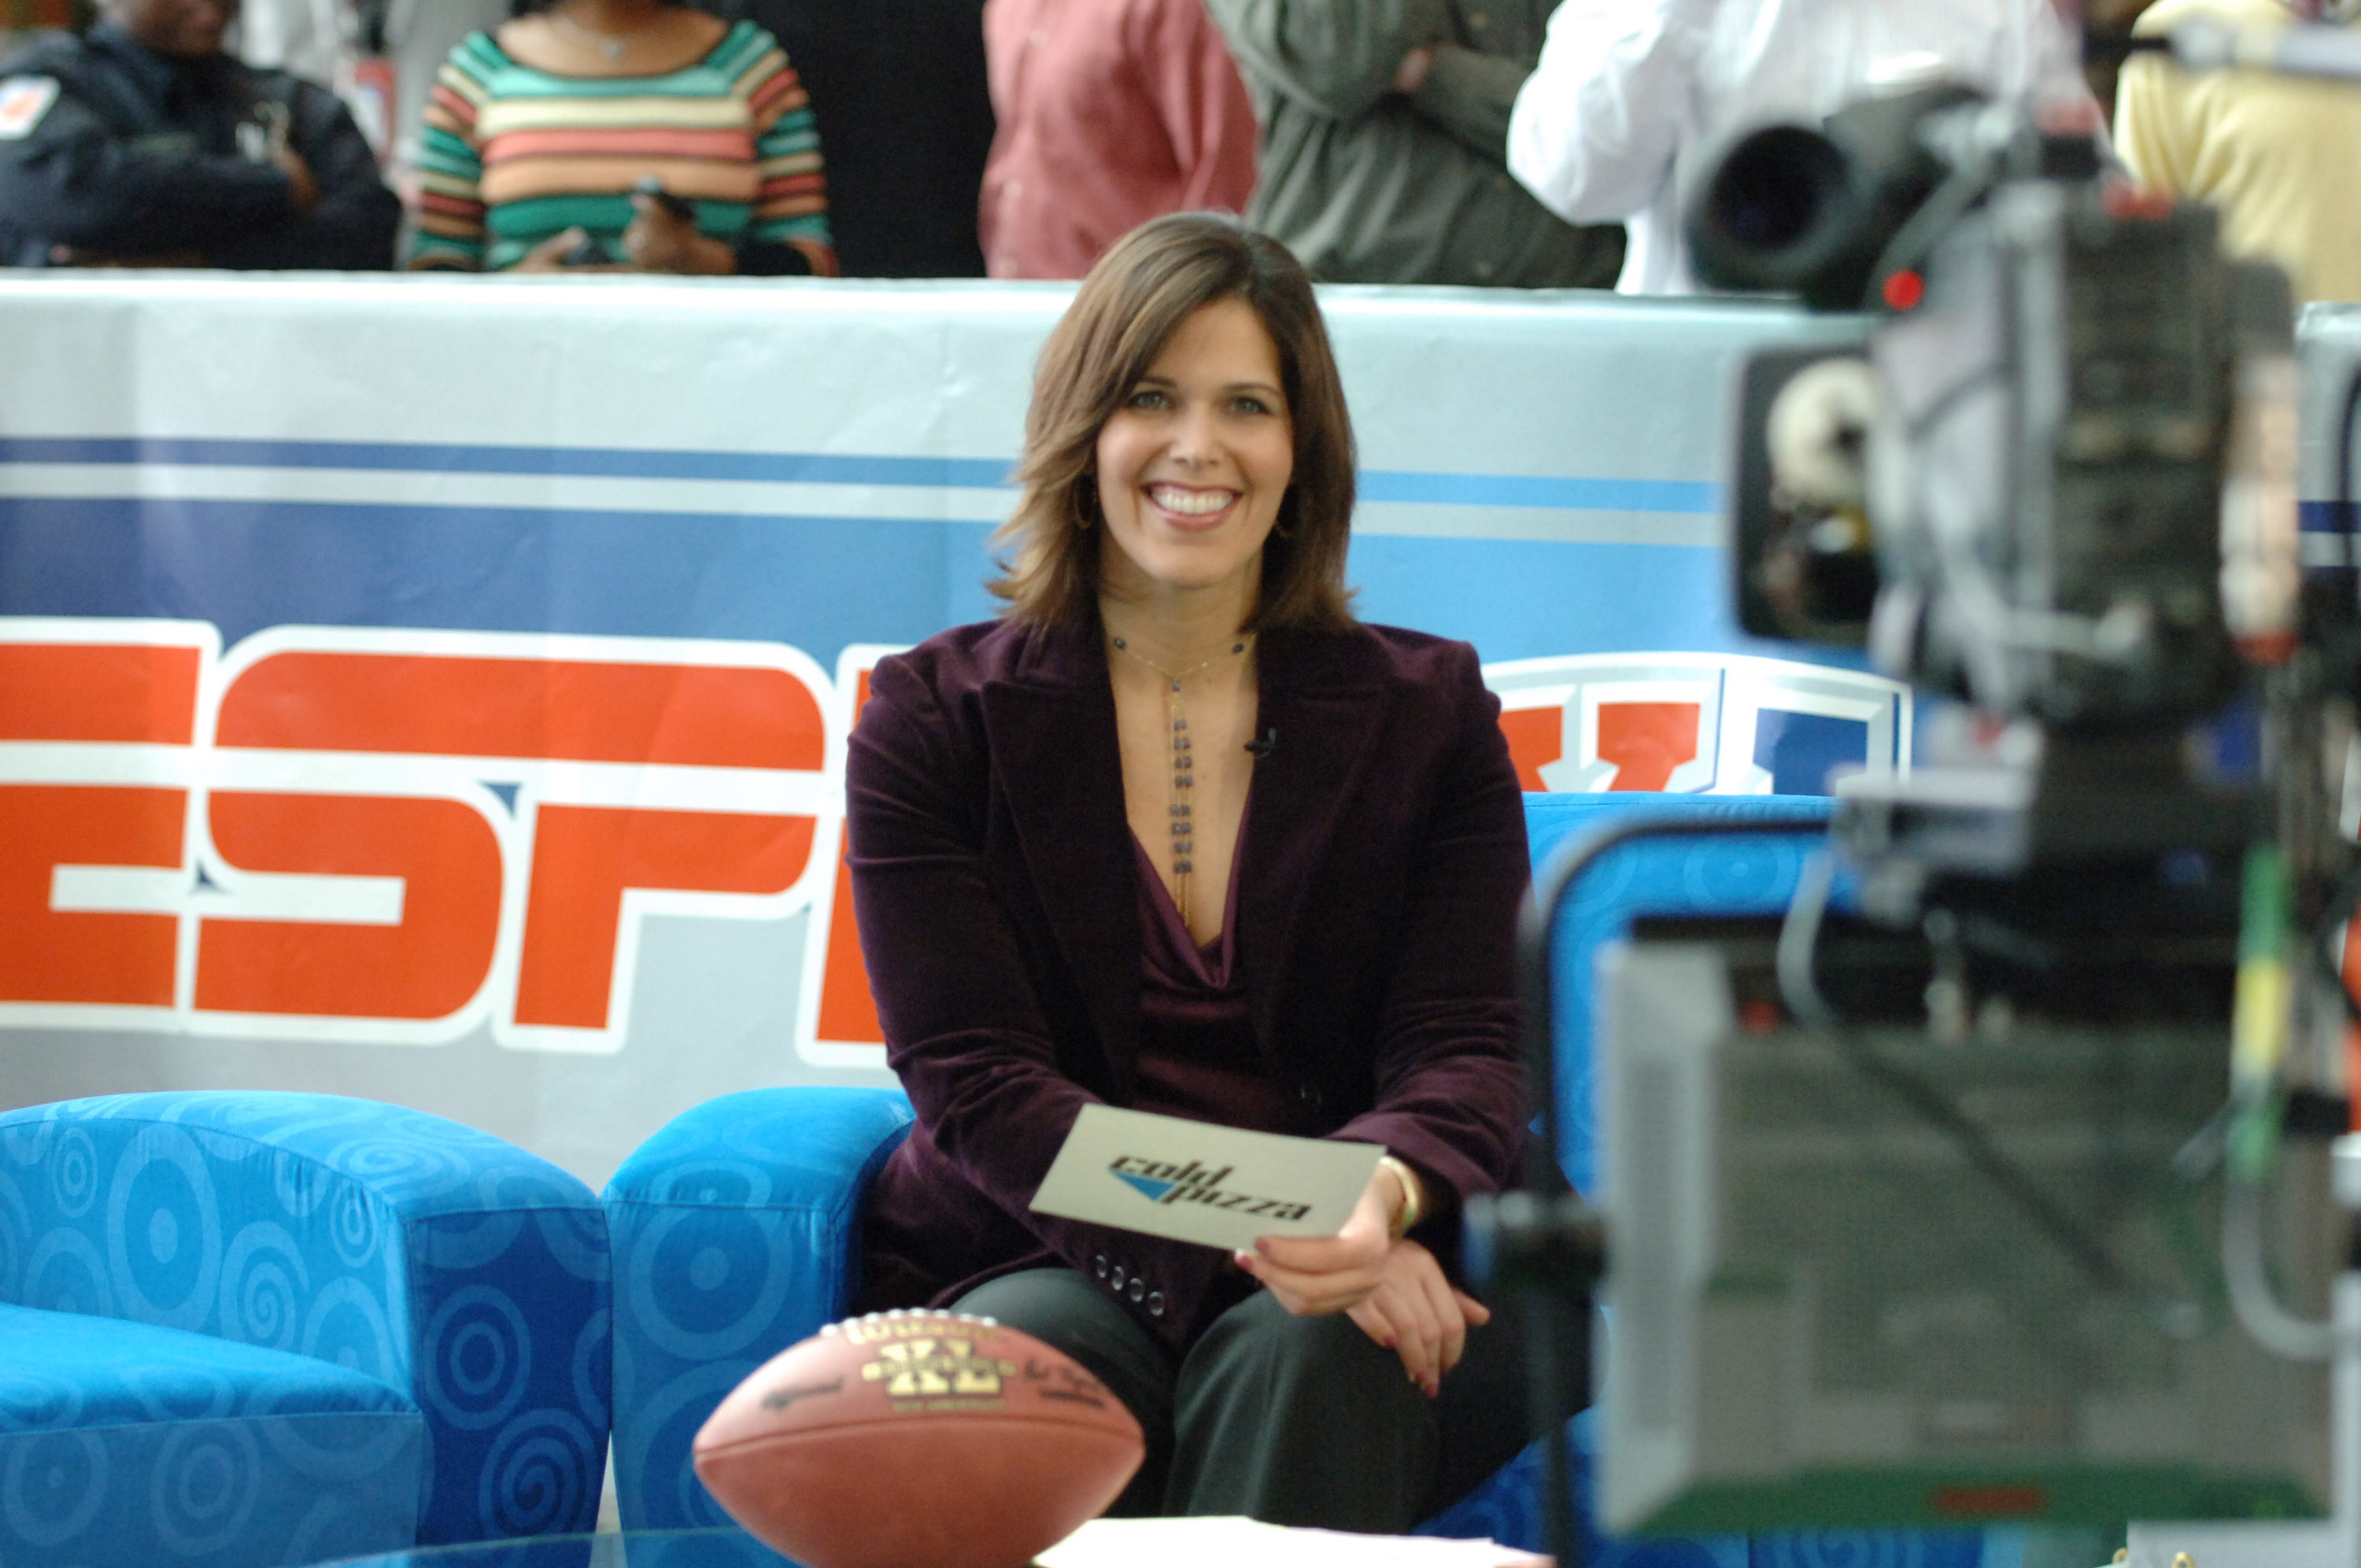 Dana Jacobson during a broadcast of ESPN's Cold Pizza from the Super Bowl XL Media Center at the Renaissance Center in Detroit, Michigan on January 30, 2006.  (Photo by Al Messerschmidt/Getty Images)